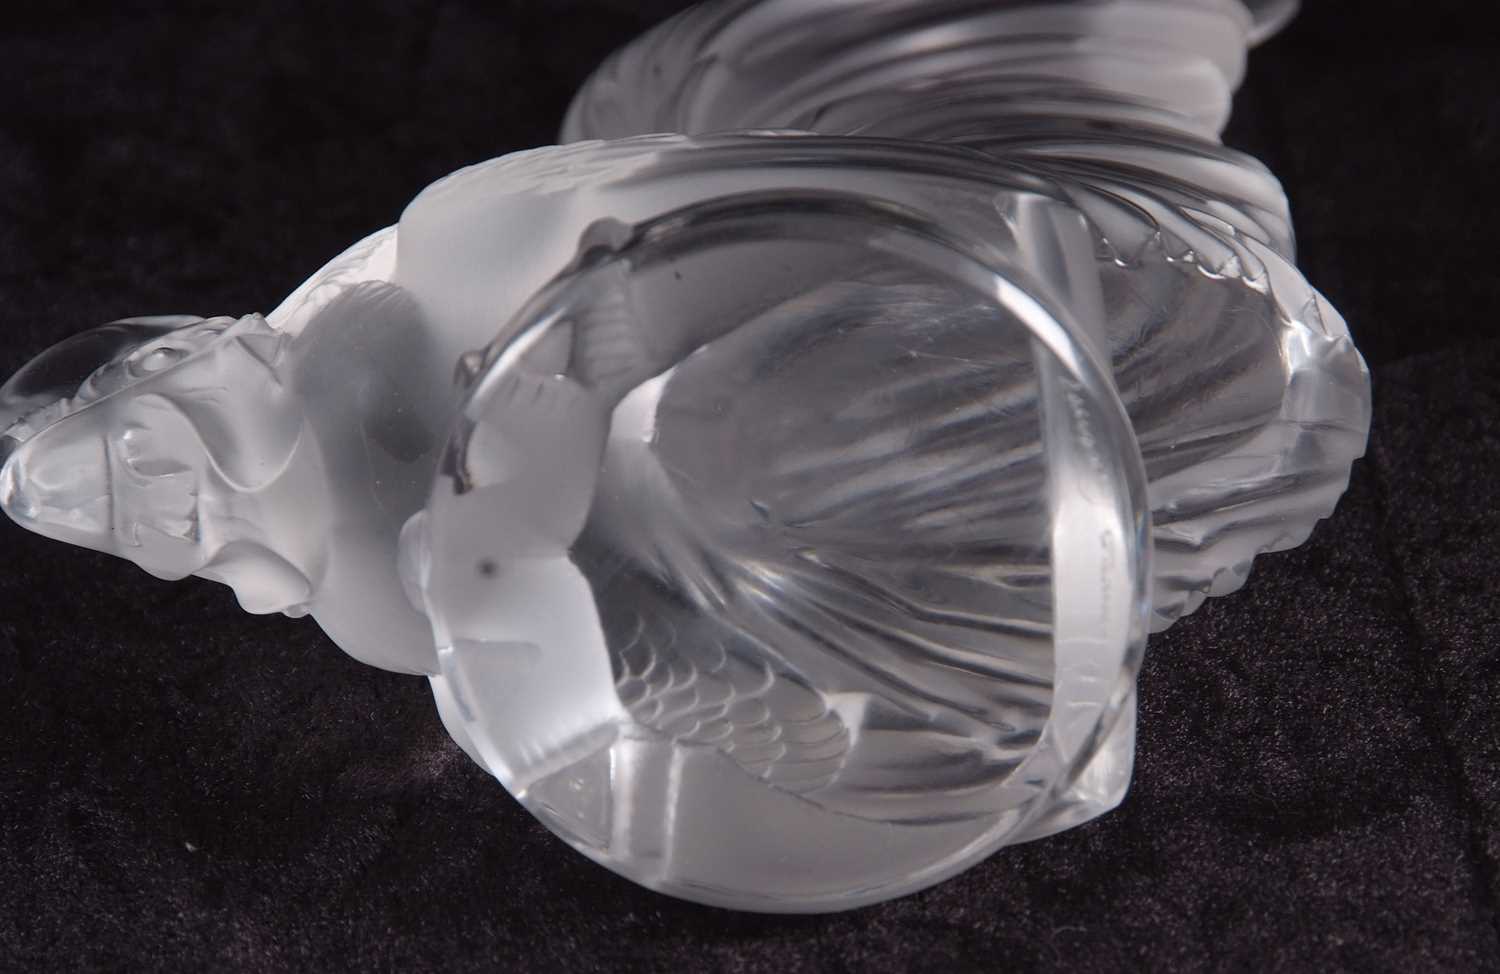 Lalique Coq Nain car mascot in the form of a moulded cockerel in clear and frosted glass engraved - Image 7 of 7